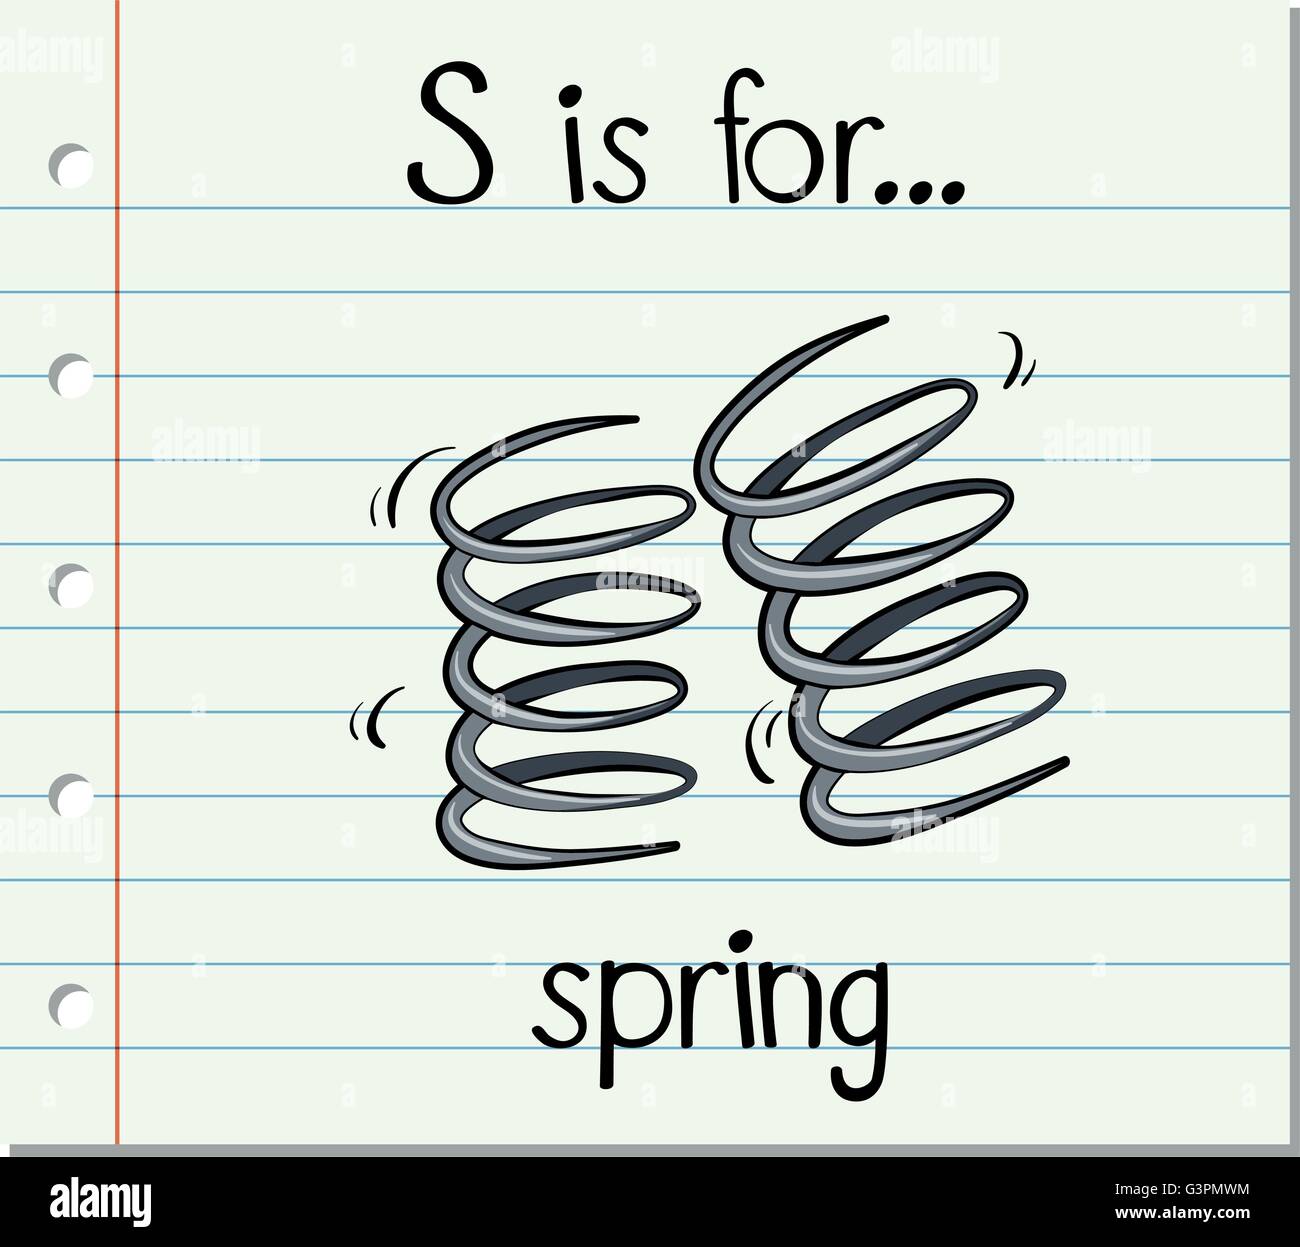 Flashcard letter S is for spring illustration Stock Vector